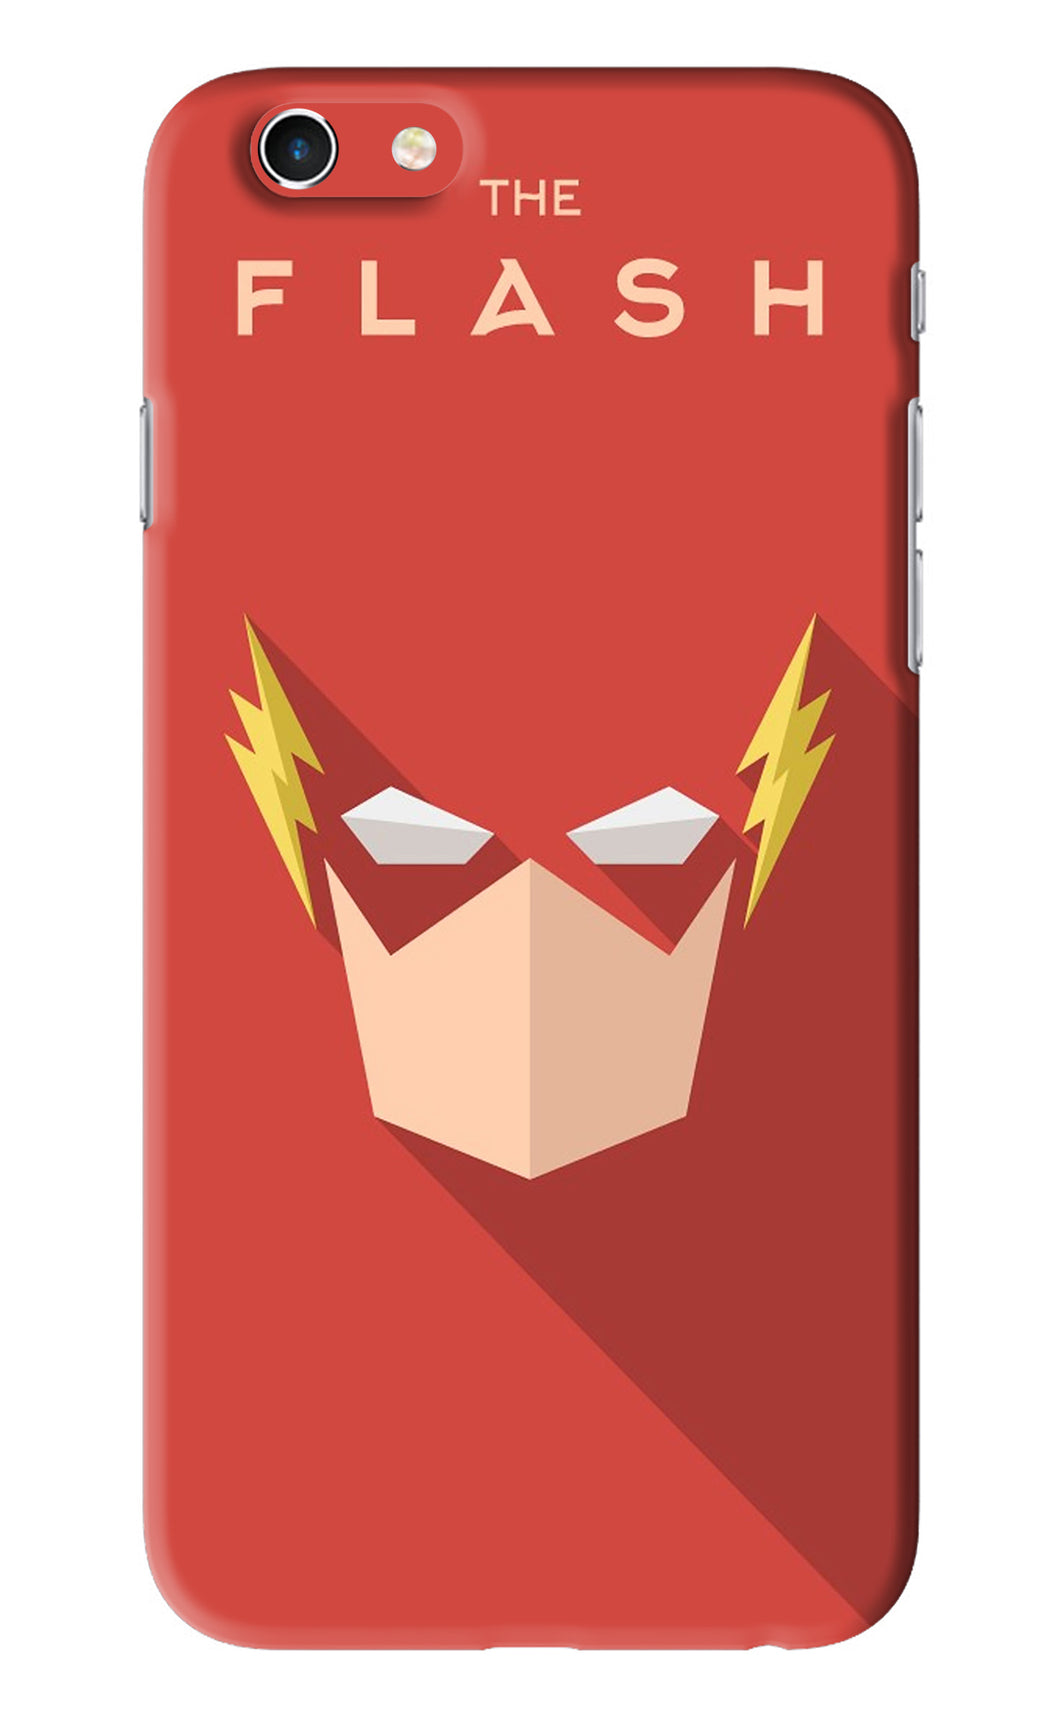 The Flash iPhone 6S Back Skin Wrap